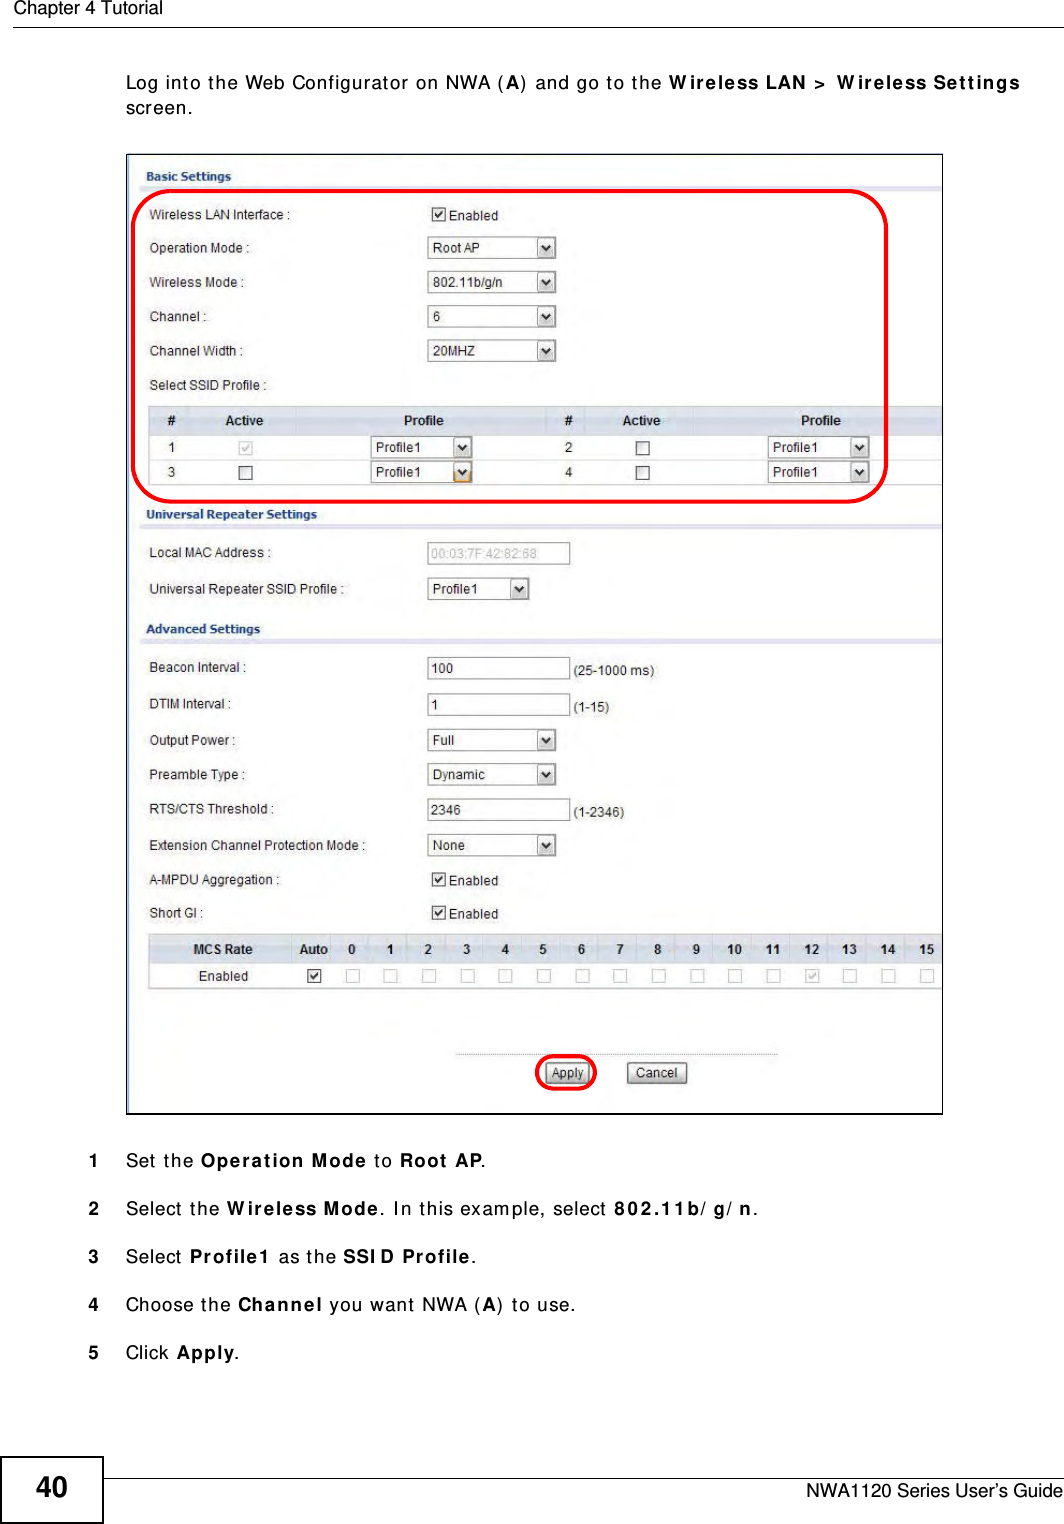 Chapter 4 TutorialNWA1120 Series User’s Guide40Log into the Web Configurator on NWA (A) and go to the Wireless LAN &gt; Wireless Settings screen.1Set the Operation Mode to Root AP.2Select the Wireless Mode. In this example, select 802.11b/g/n. 3Select Profile1 as the SSID Profile. 4Choose the Channel you want NWA (A) to use.5Click Apply. 